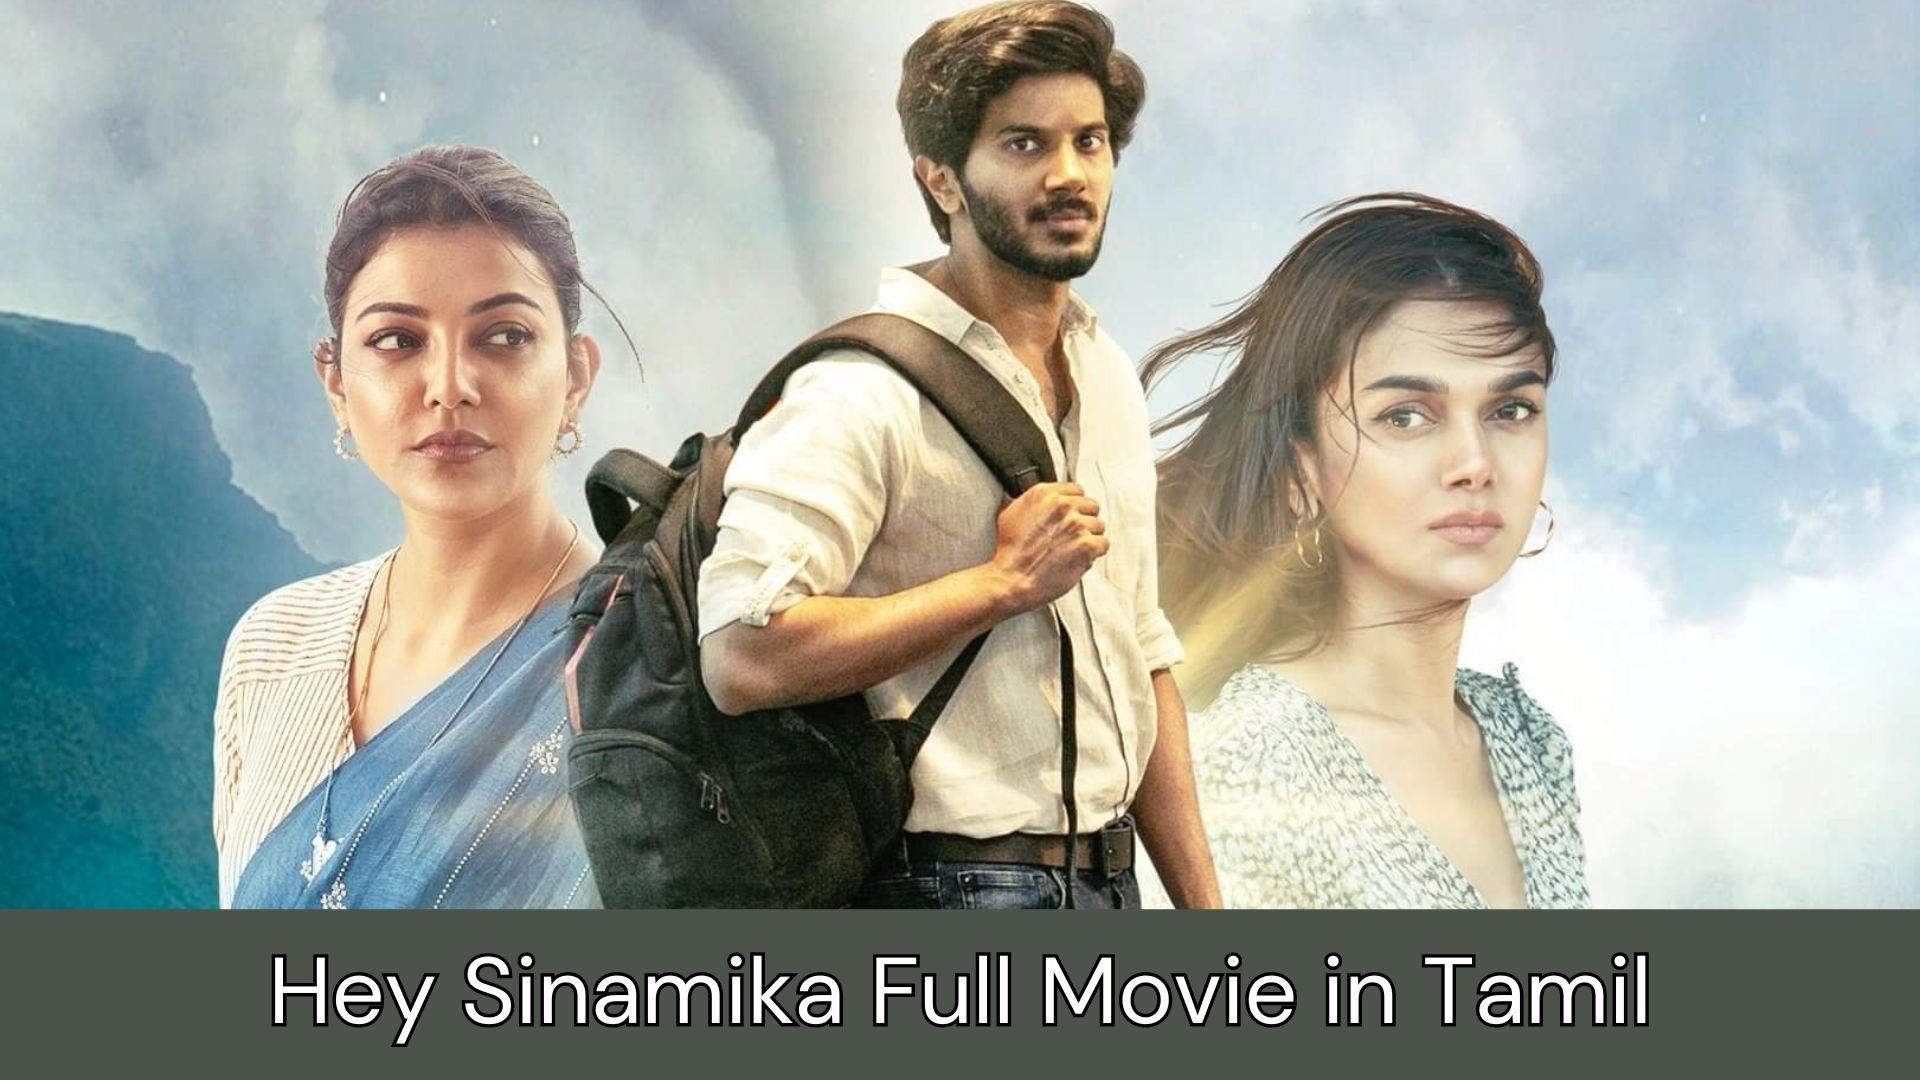 Hey Sinamika Full Movie Review, IMDB, Cast, Budget and Collection, Release Date